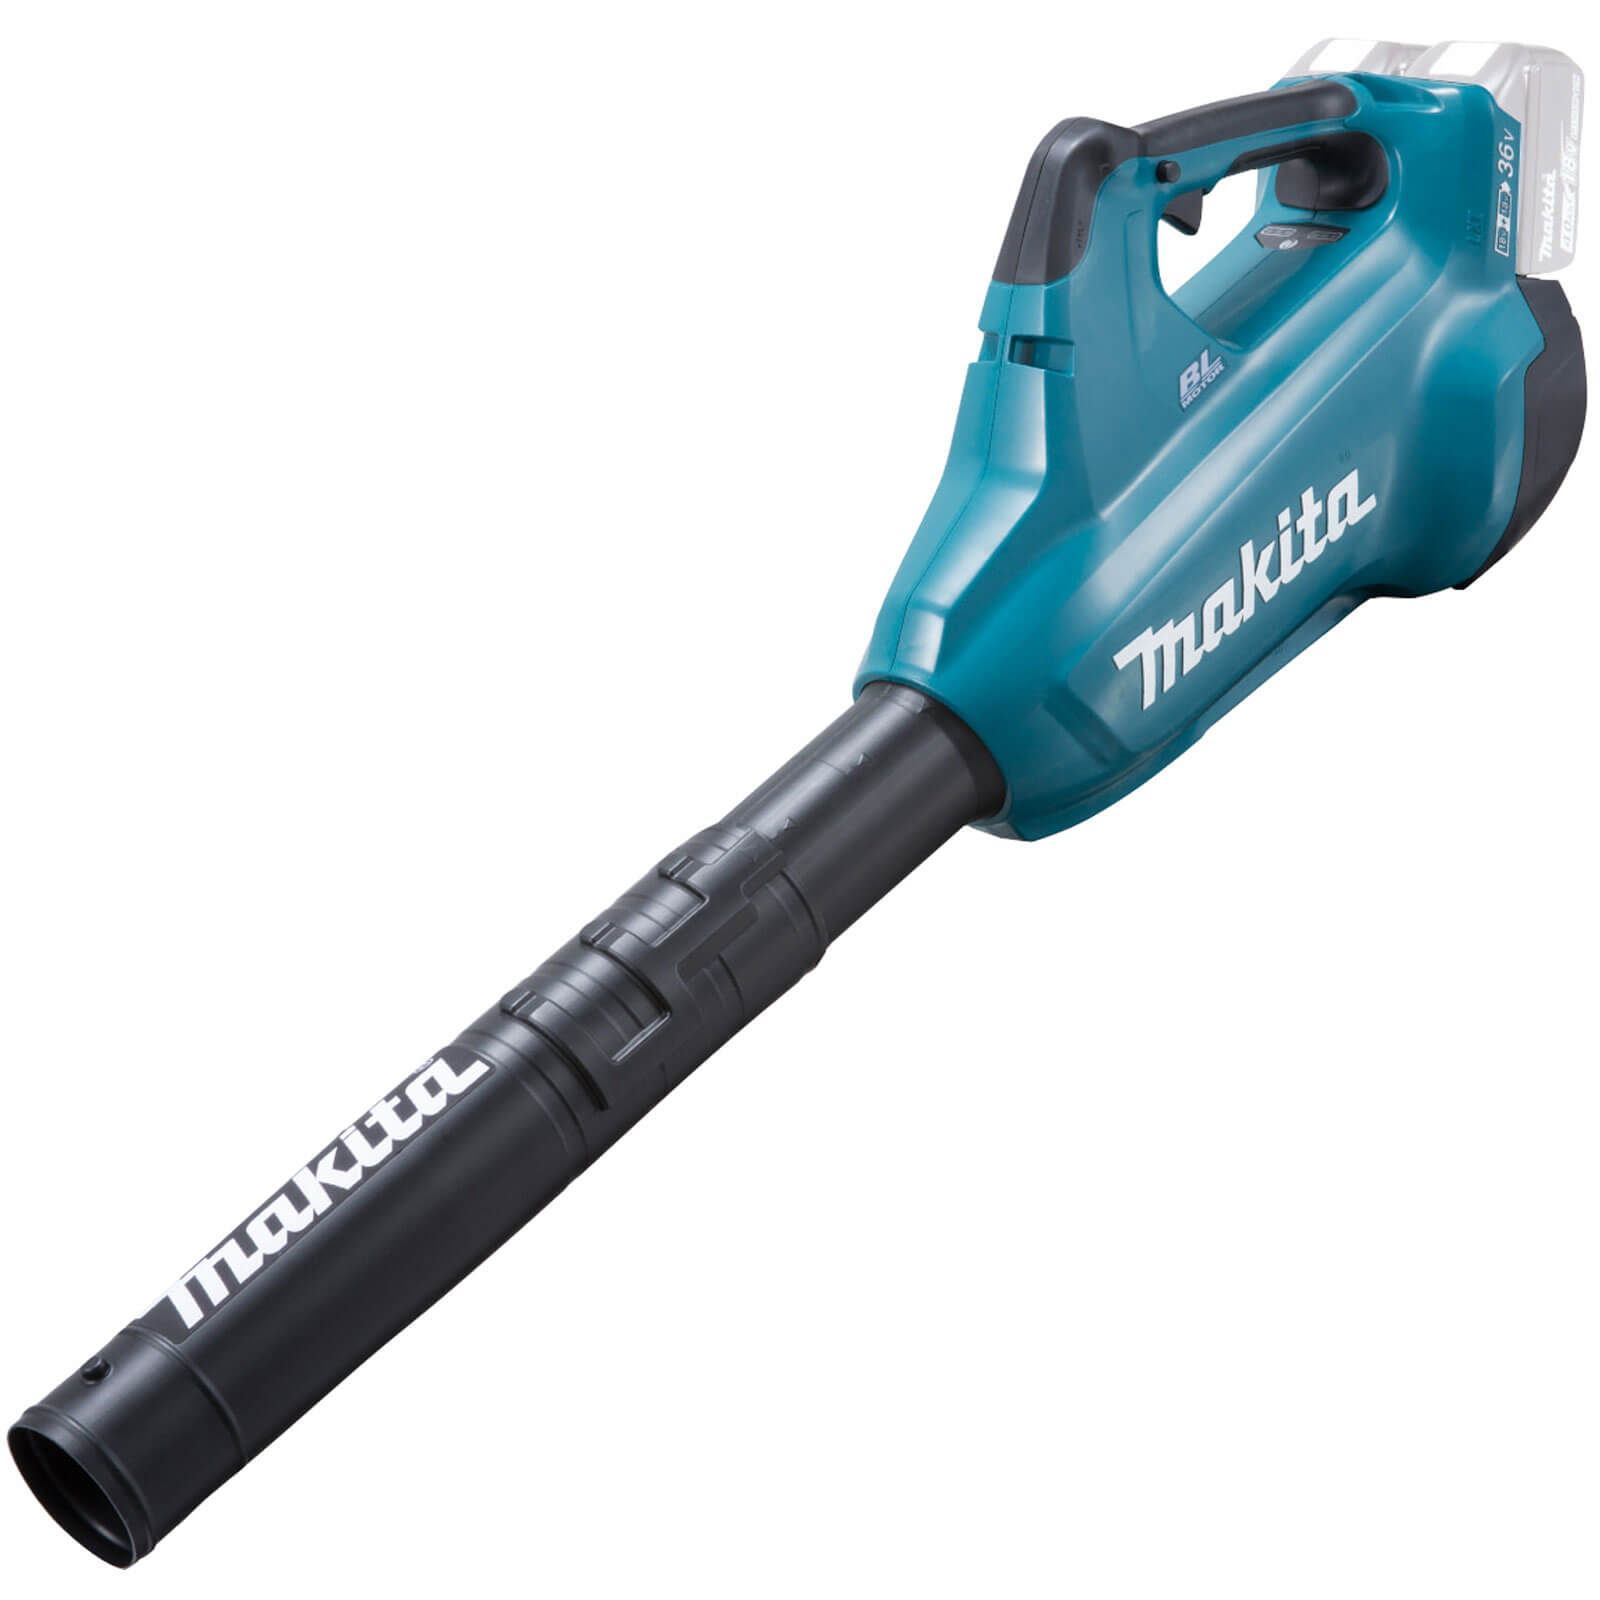 Image of Makita DUB362 Twin 18v LXT Cordless Brushless Blower No Batteries No Charger